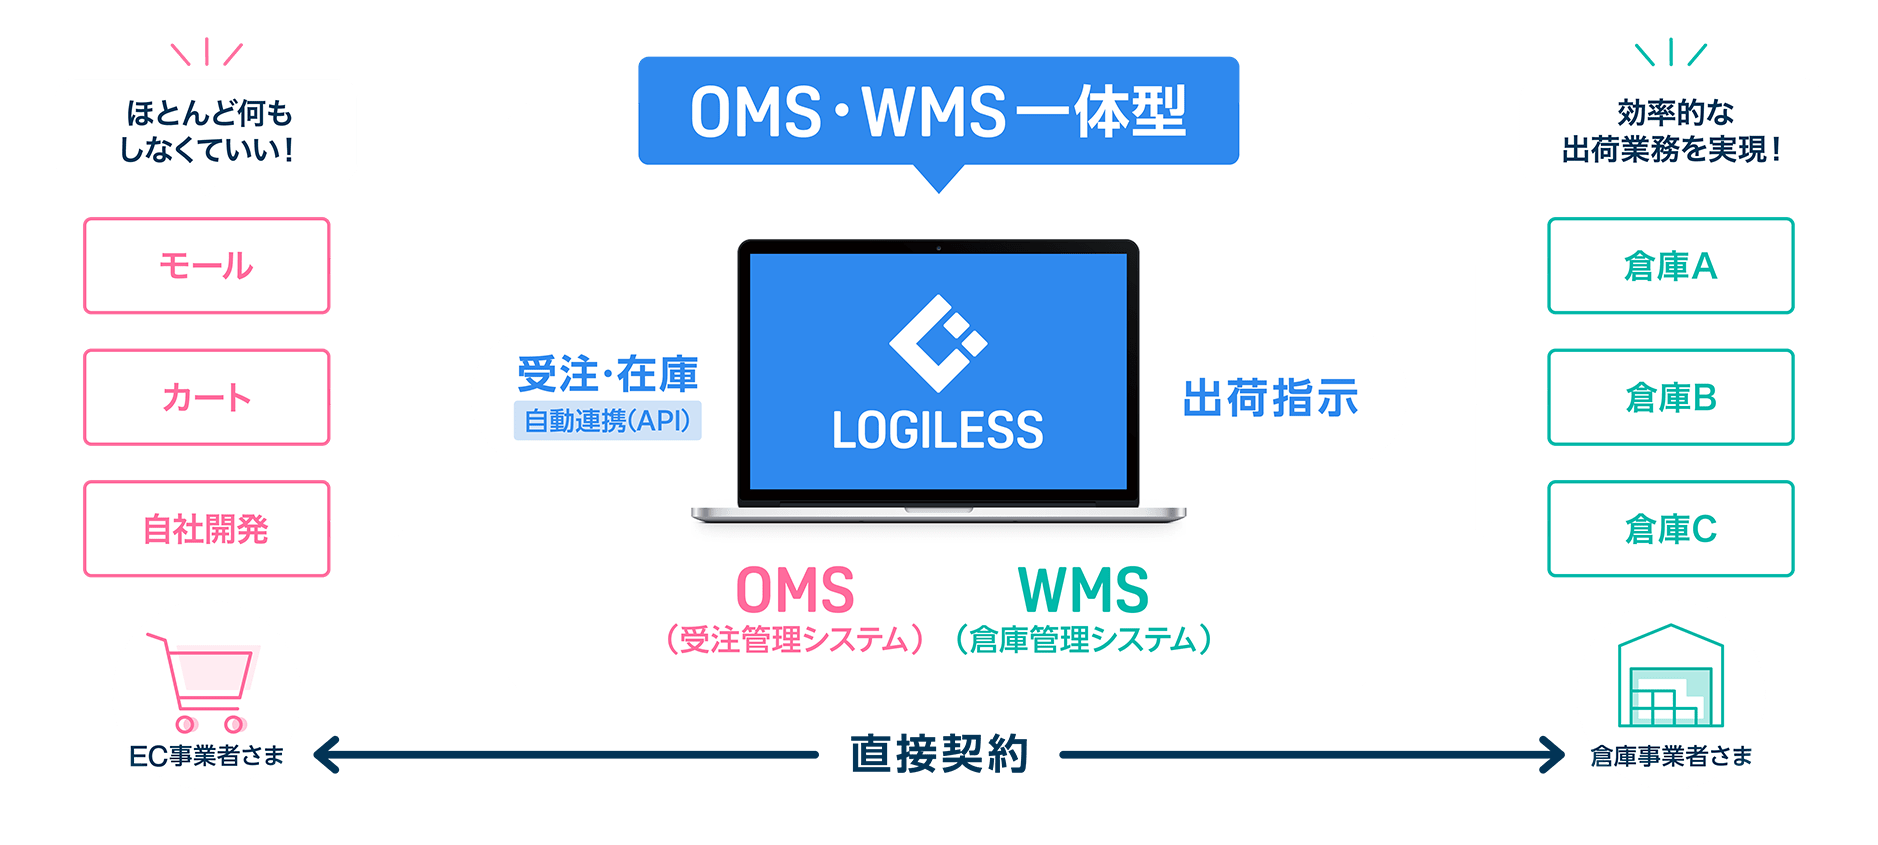 OMS・WMS一体型システム LOGILESS